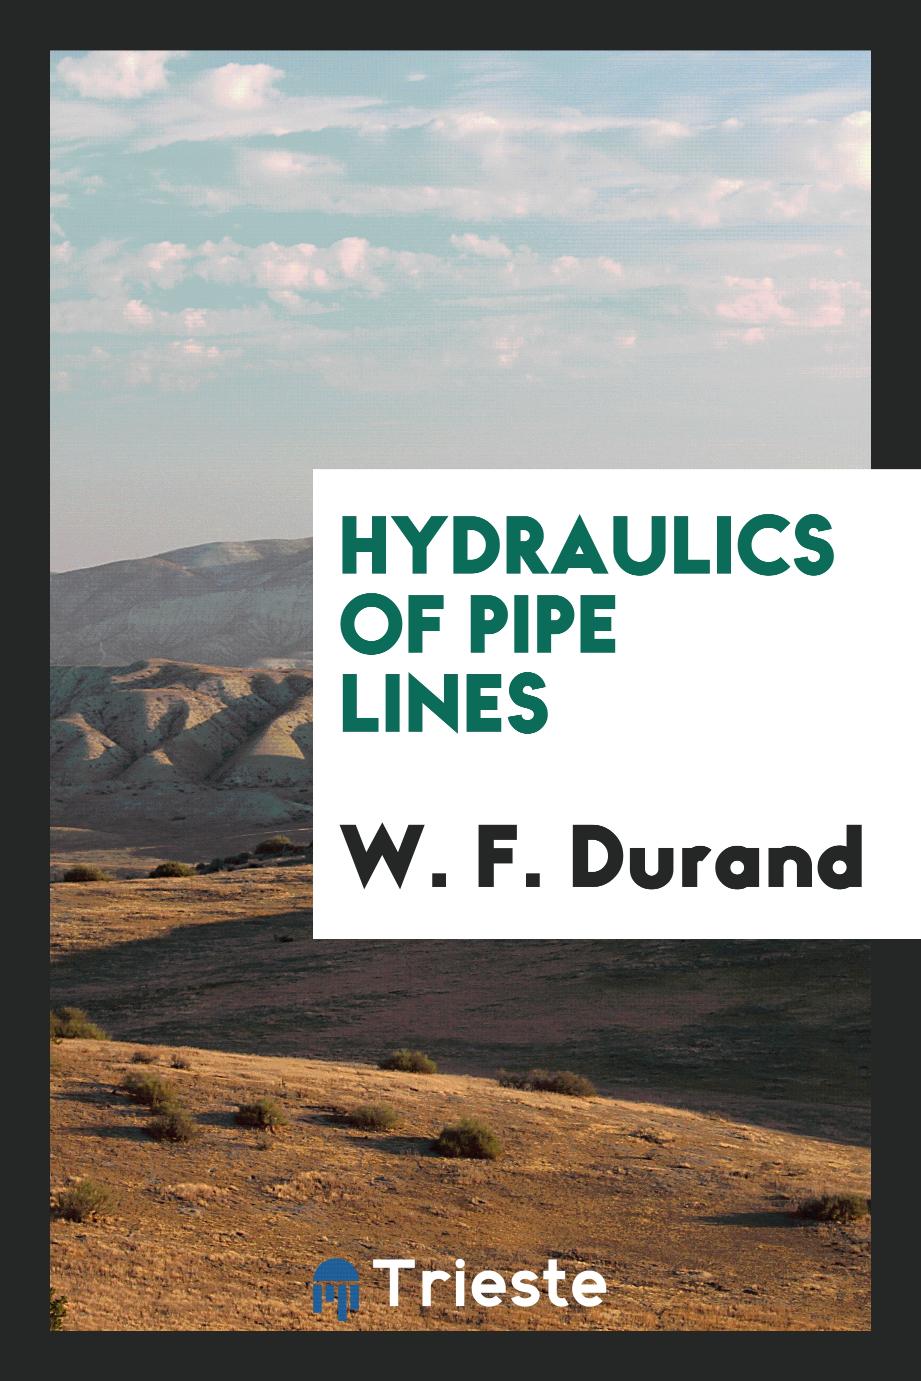 Hydraulics of pipe lines